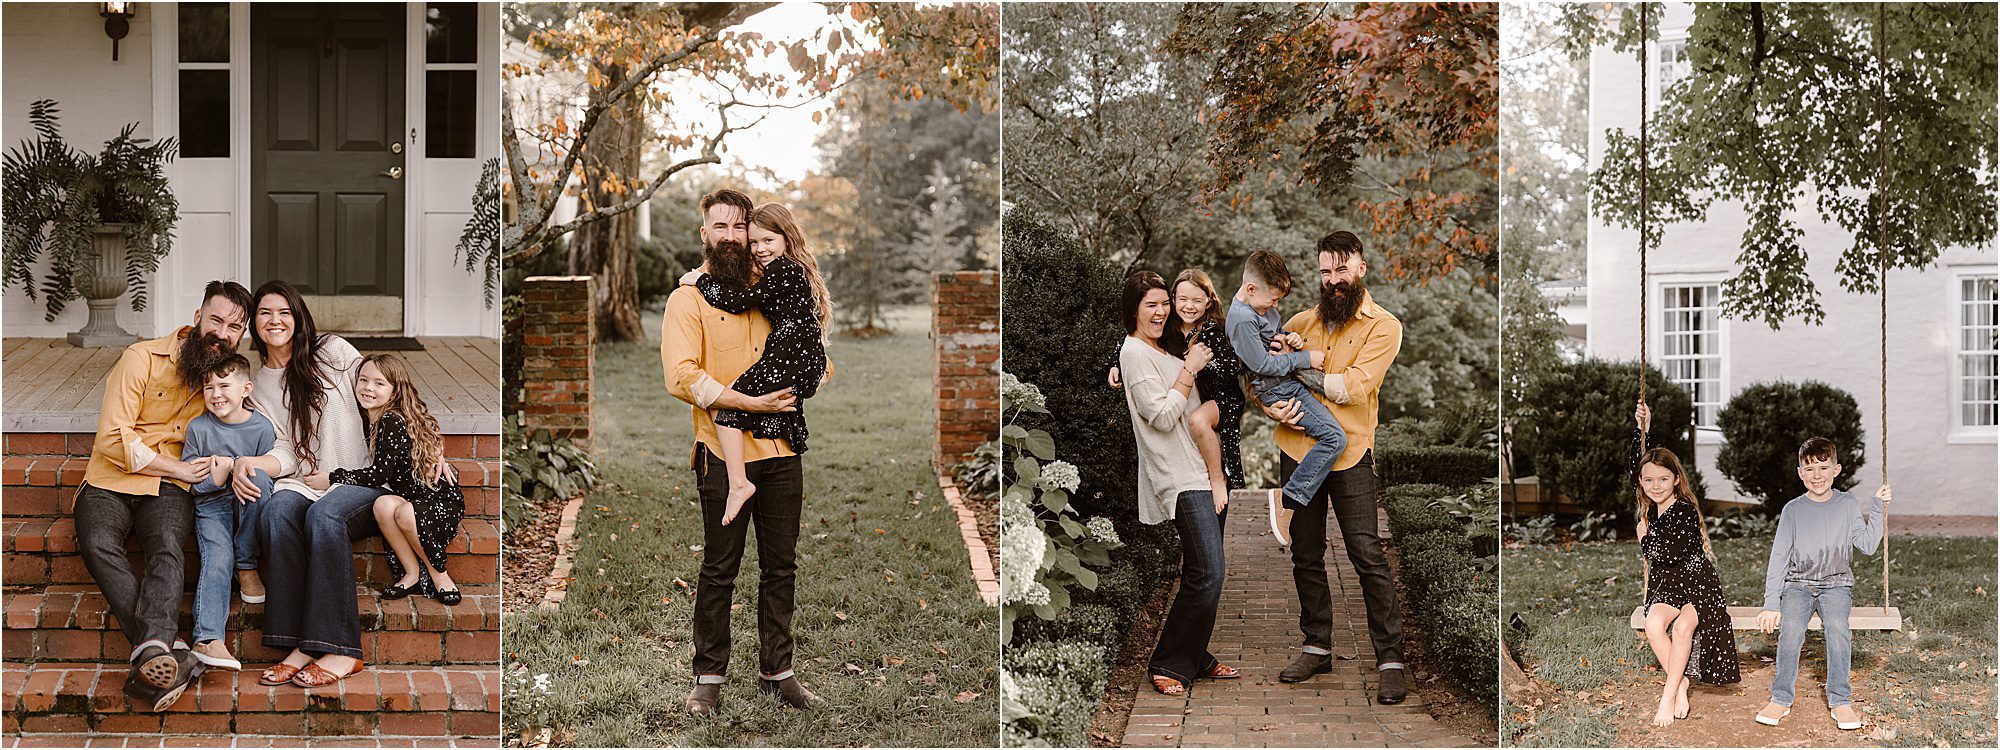 Timeless Family Photos at Knoxville Estate